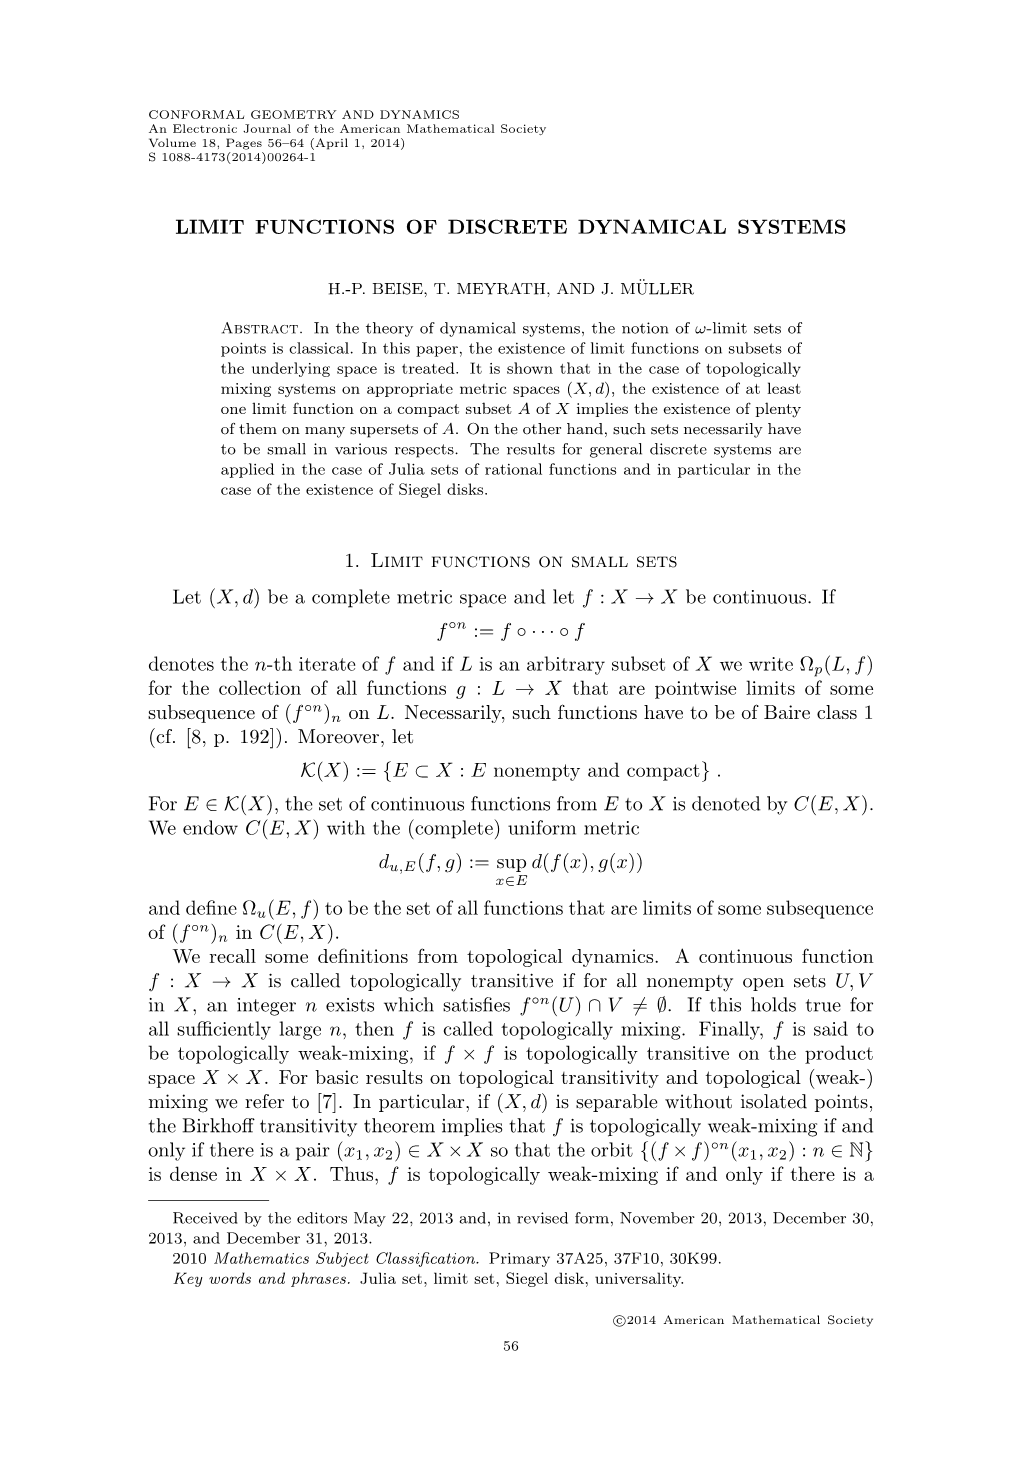 Limit Functions of Discrete Dynamical Systems